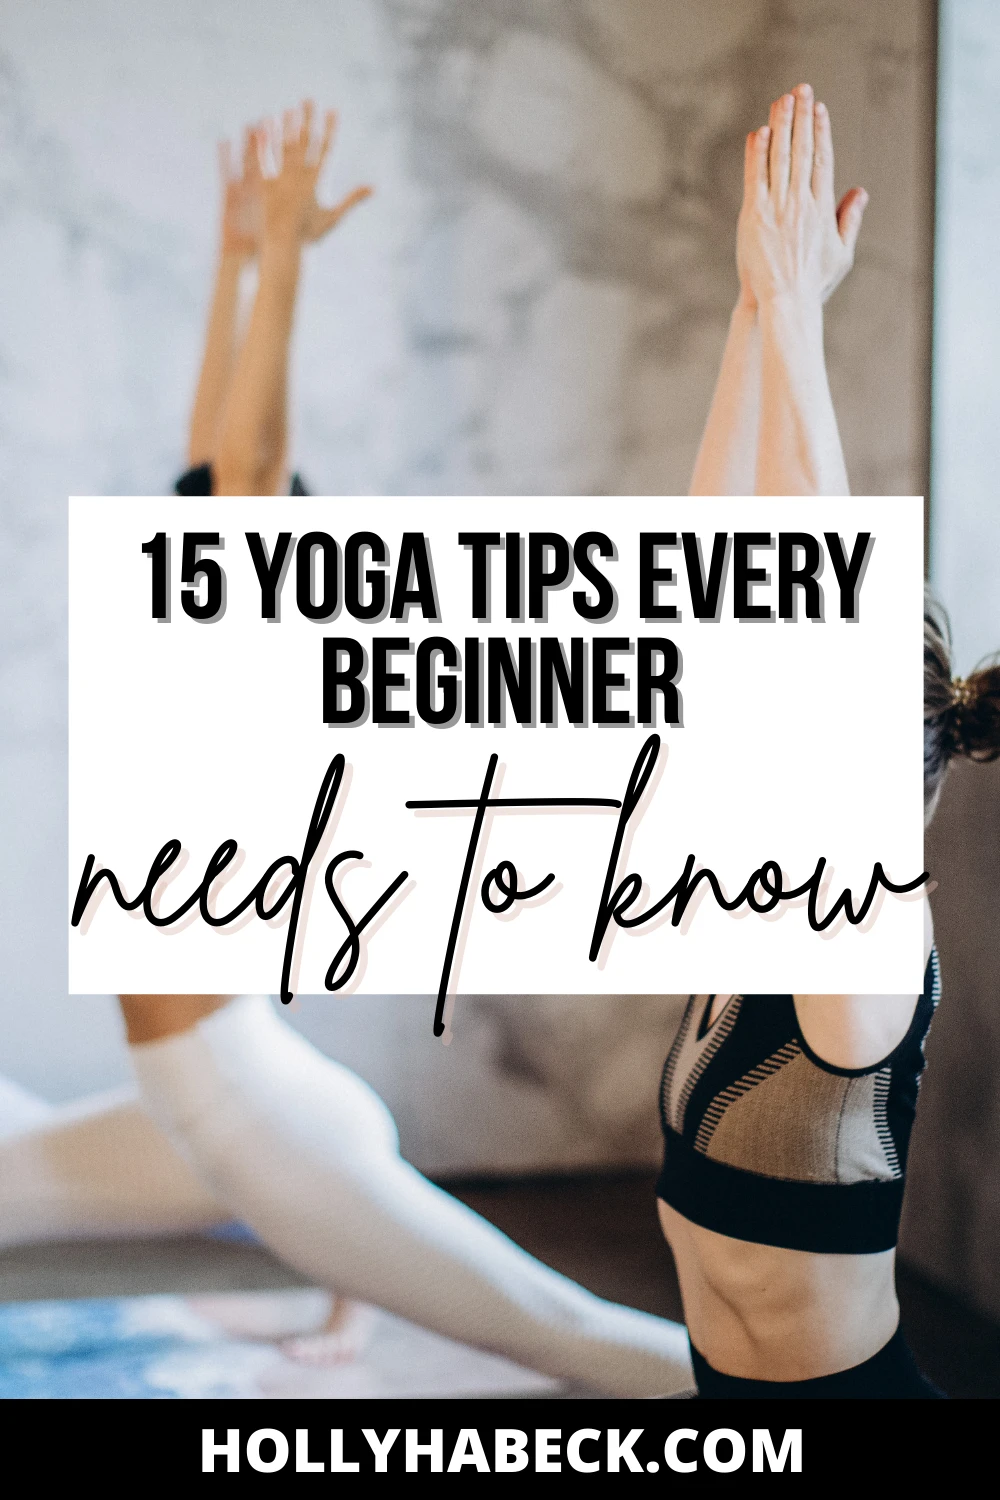 How to Get Better at Yoga